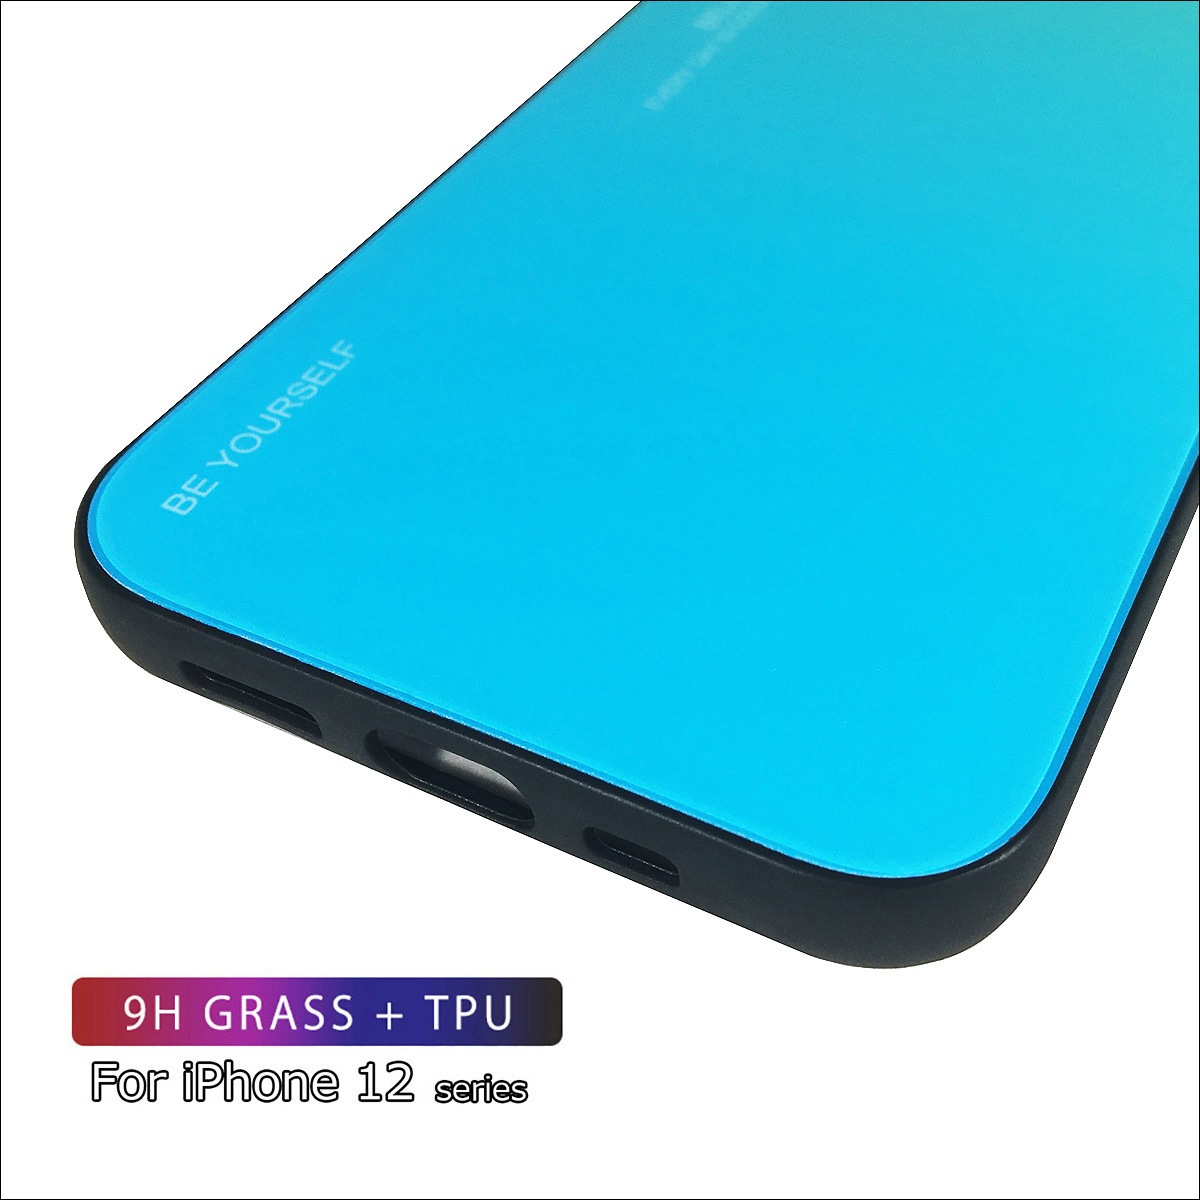 iPhone 12 mini case iPhone 12 Mini case 5.4 -inch the back side strengthen glass gradation design Impact-proof light blue green series 